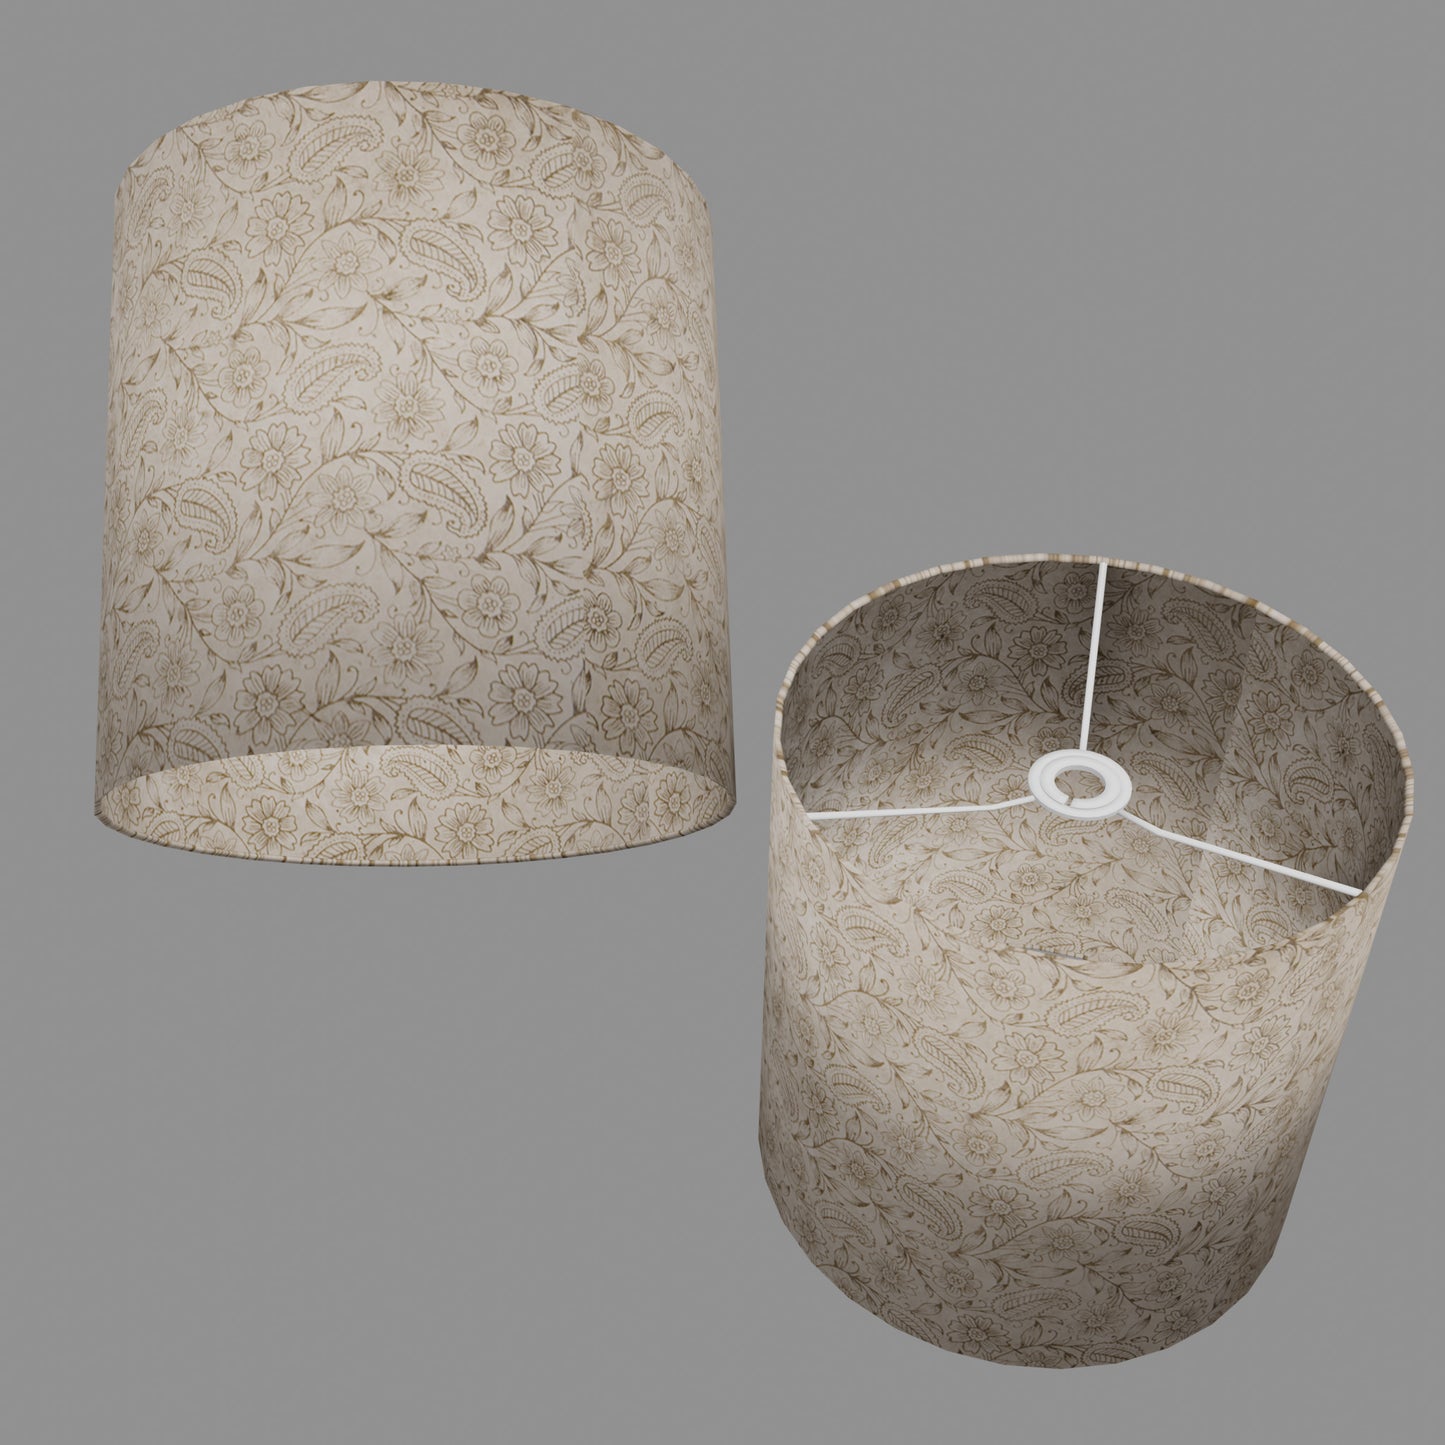 Drum Lamp Shade - P69 - Garden Gold on Natural, 30cm(d) x 30cm(h)